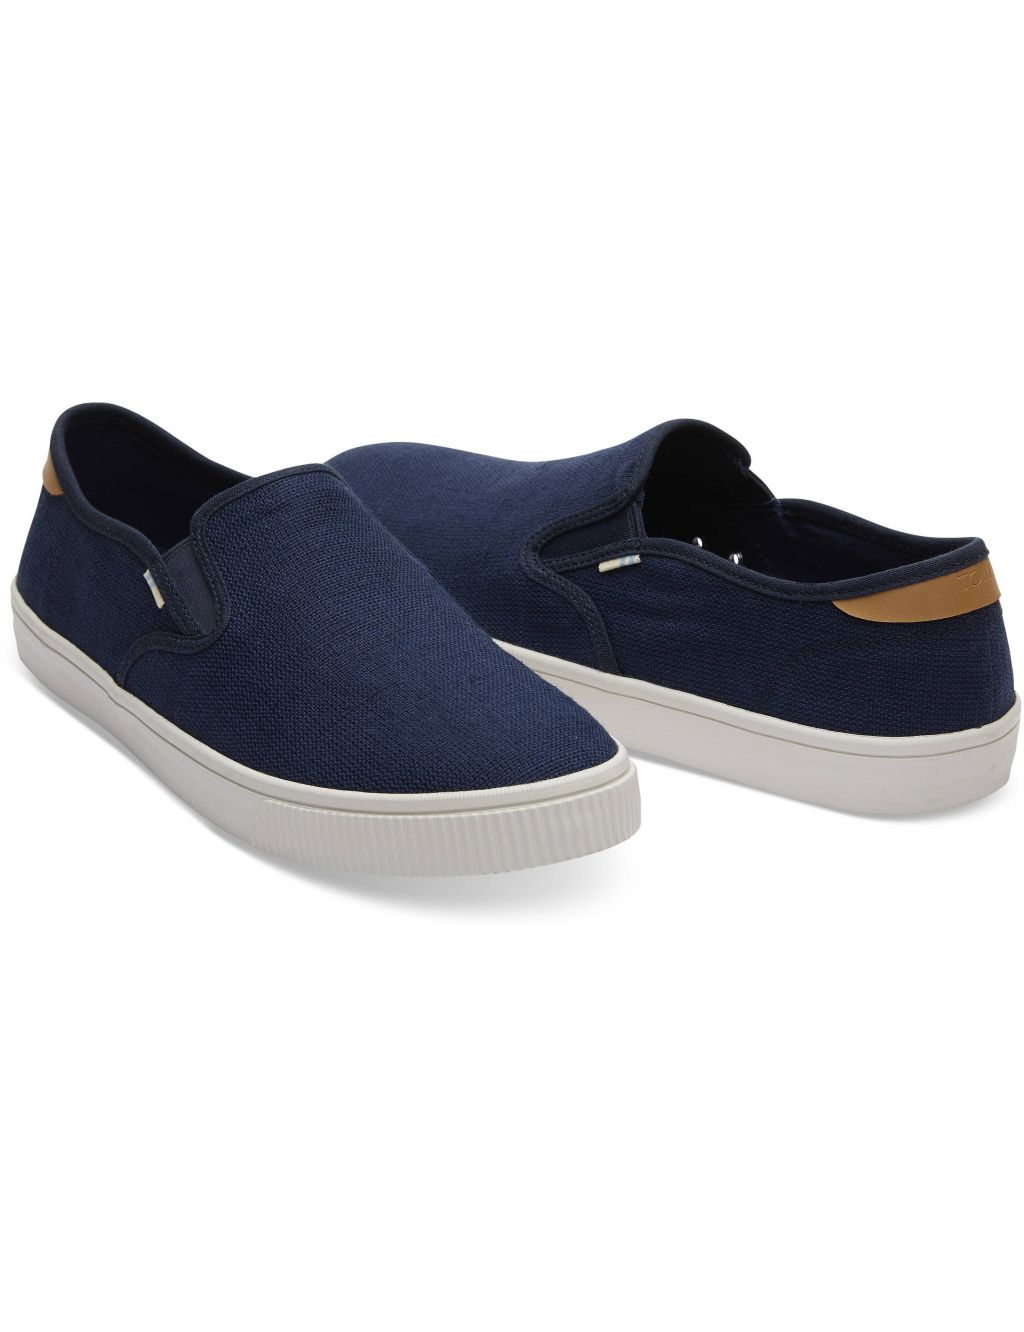 Canvas Slip-On Trainers image 3